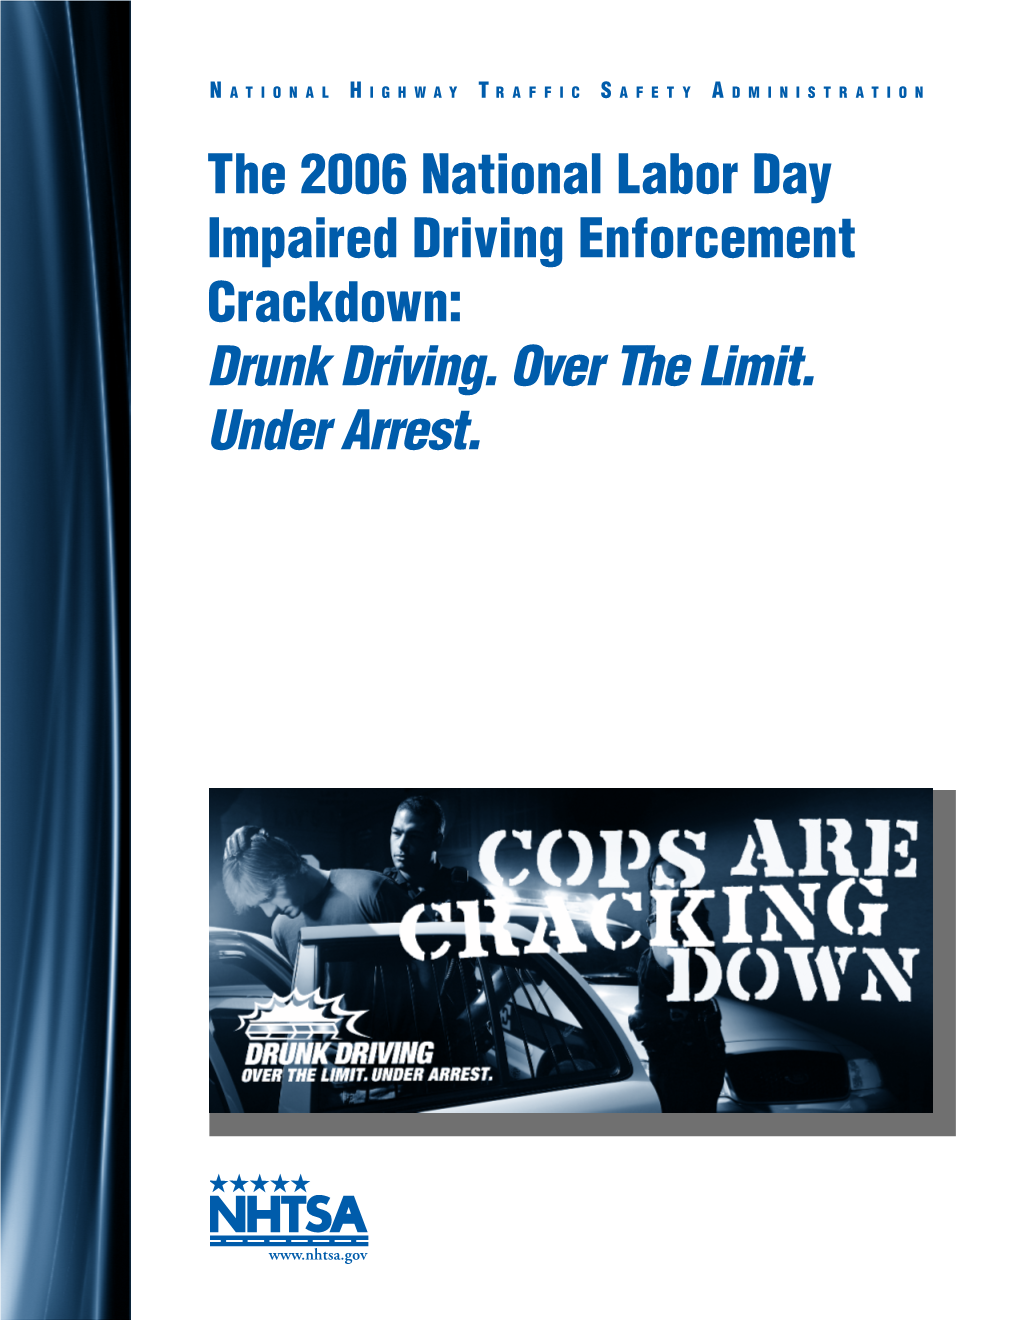 The 2006 National Labor Day Impaired Driving Enforcement Crackdown: Drunk Driving